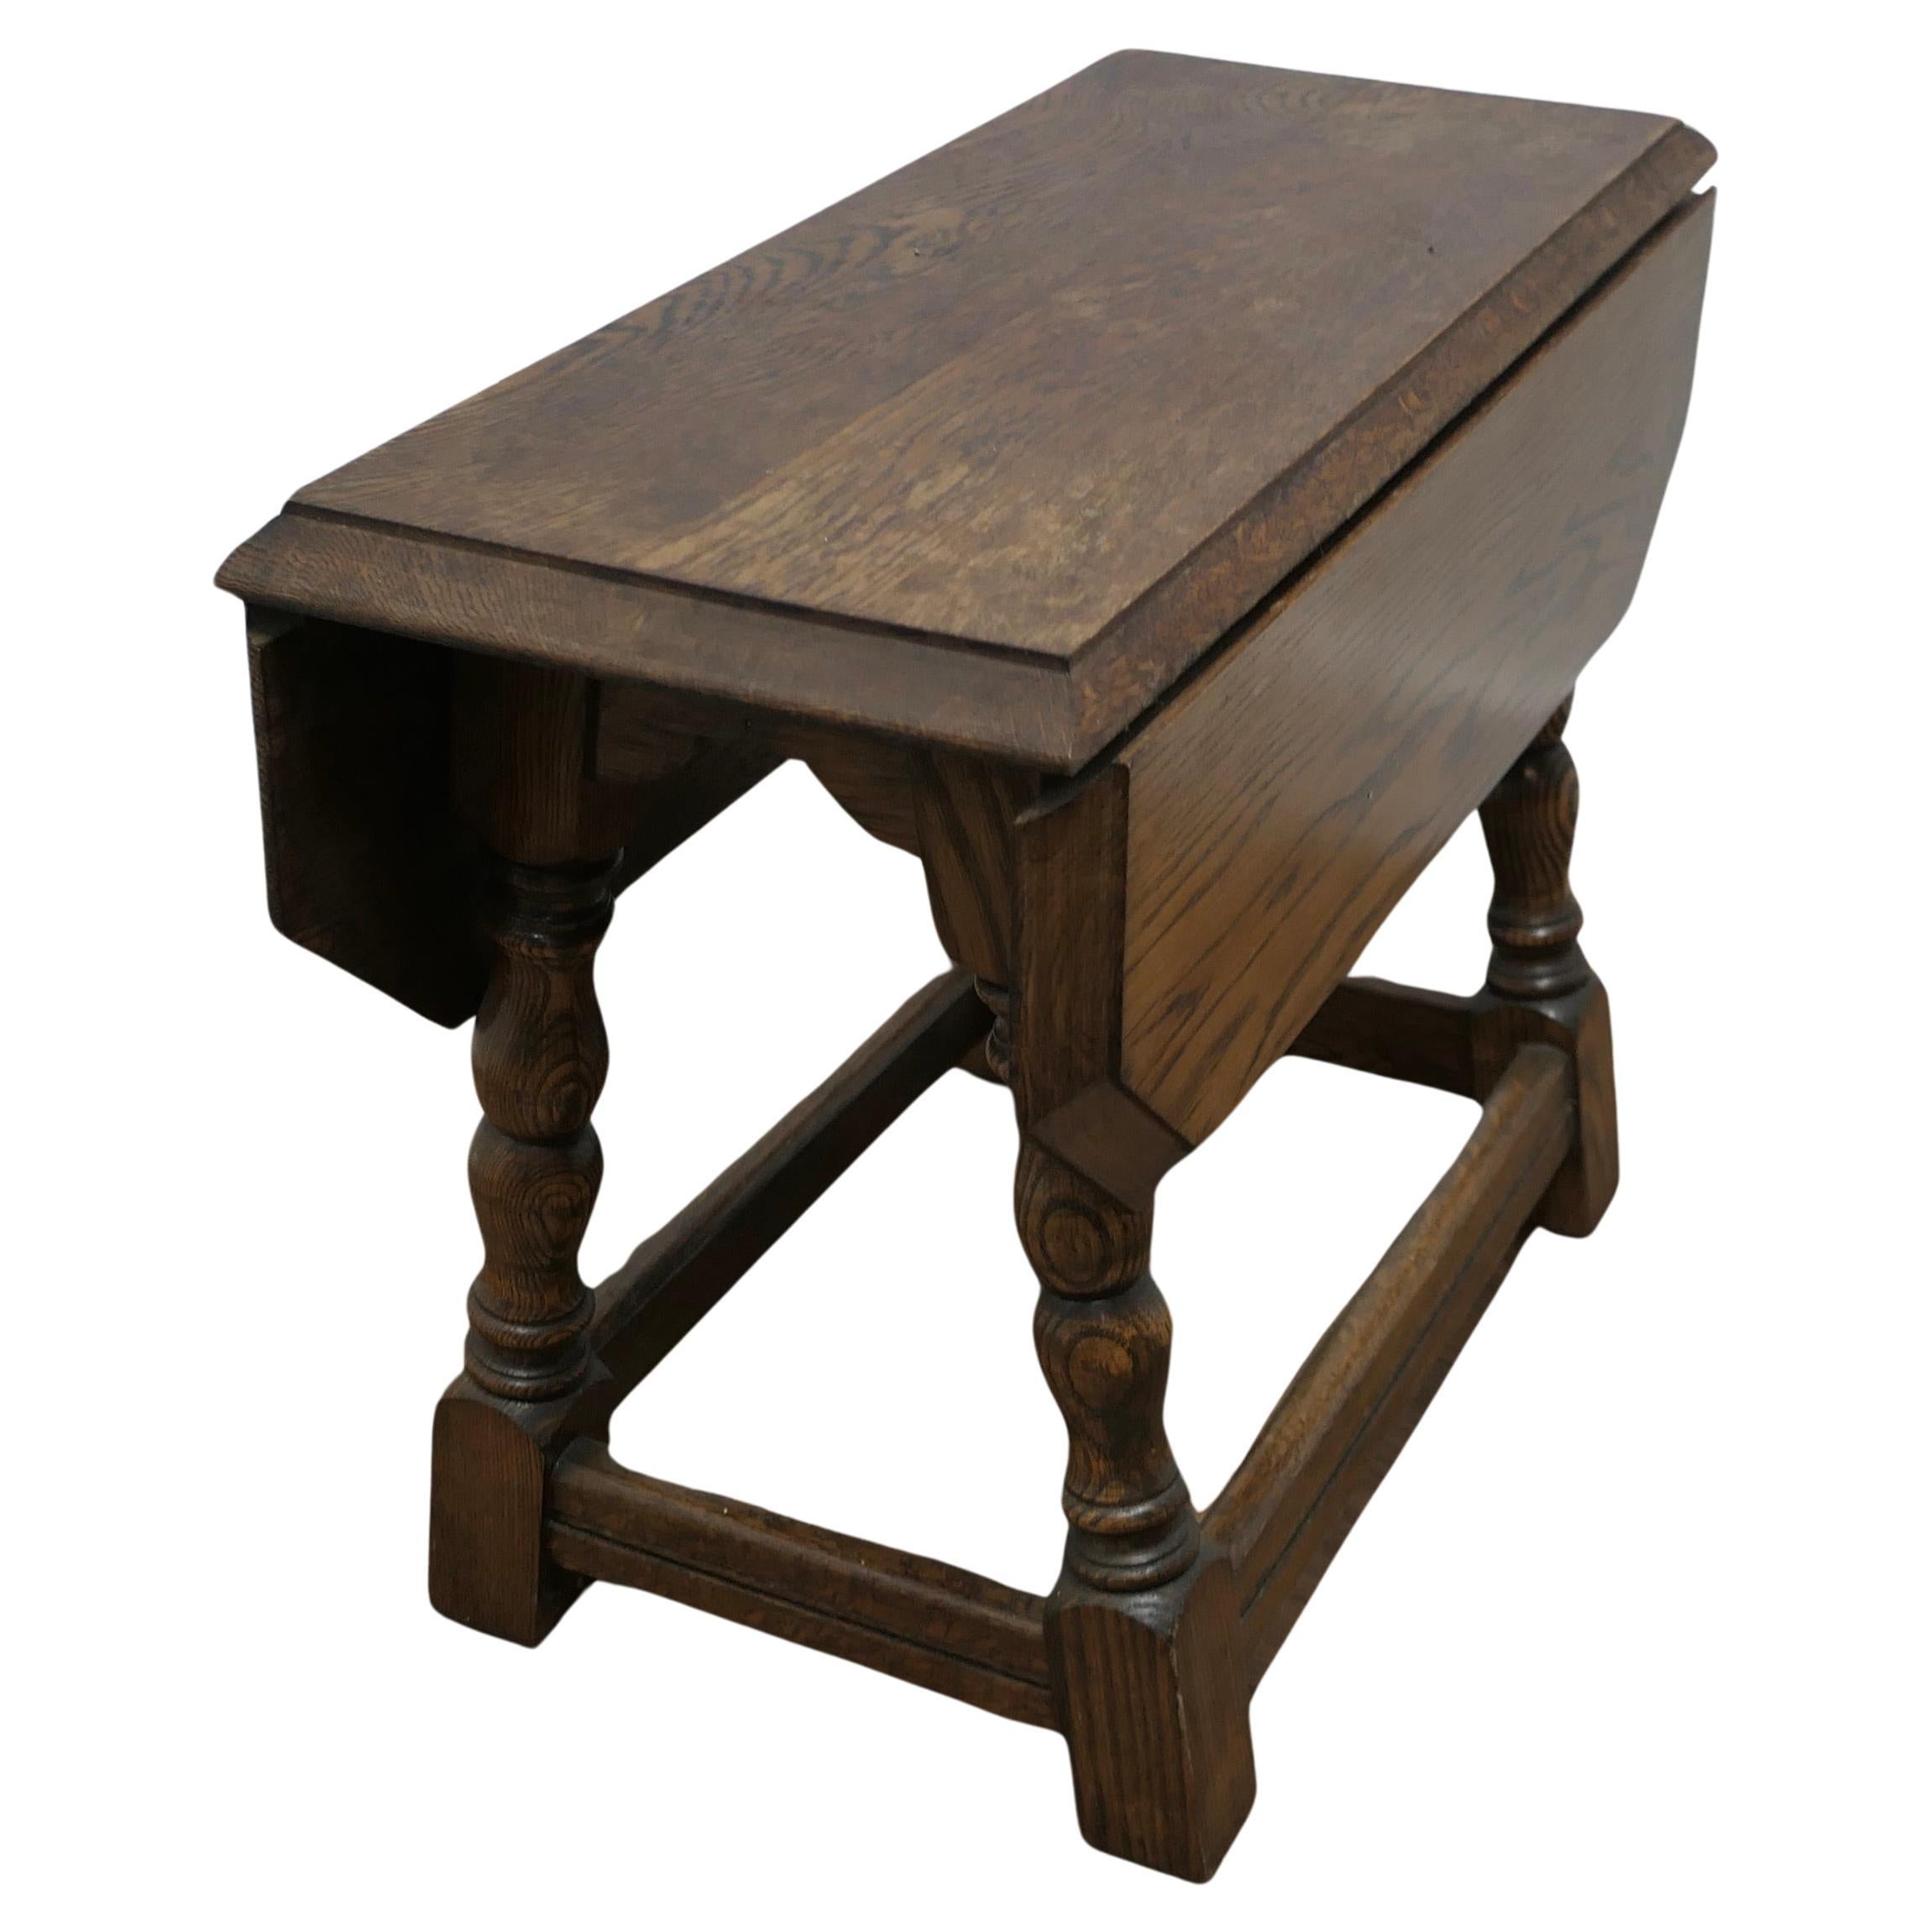 An Oak Joint Stool, Coffee Table  This a good Oak Joint   For Sale